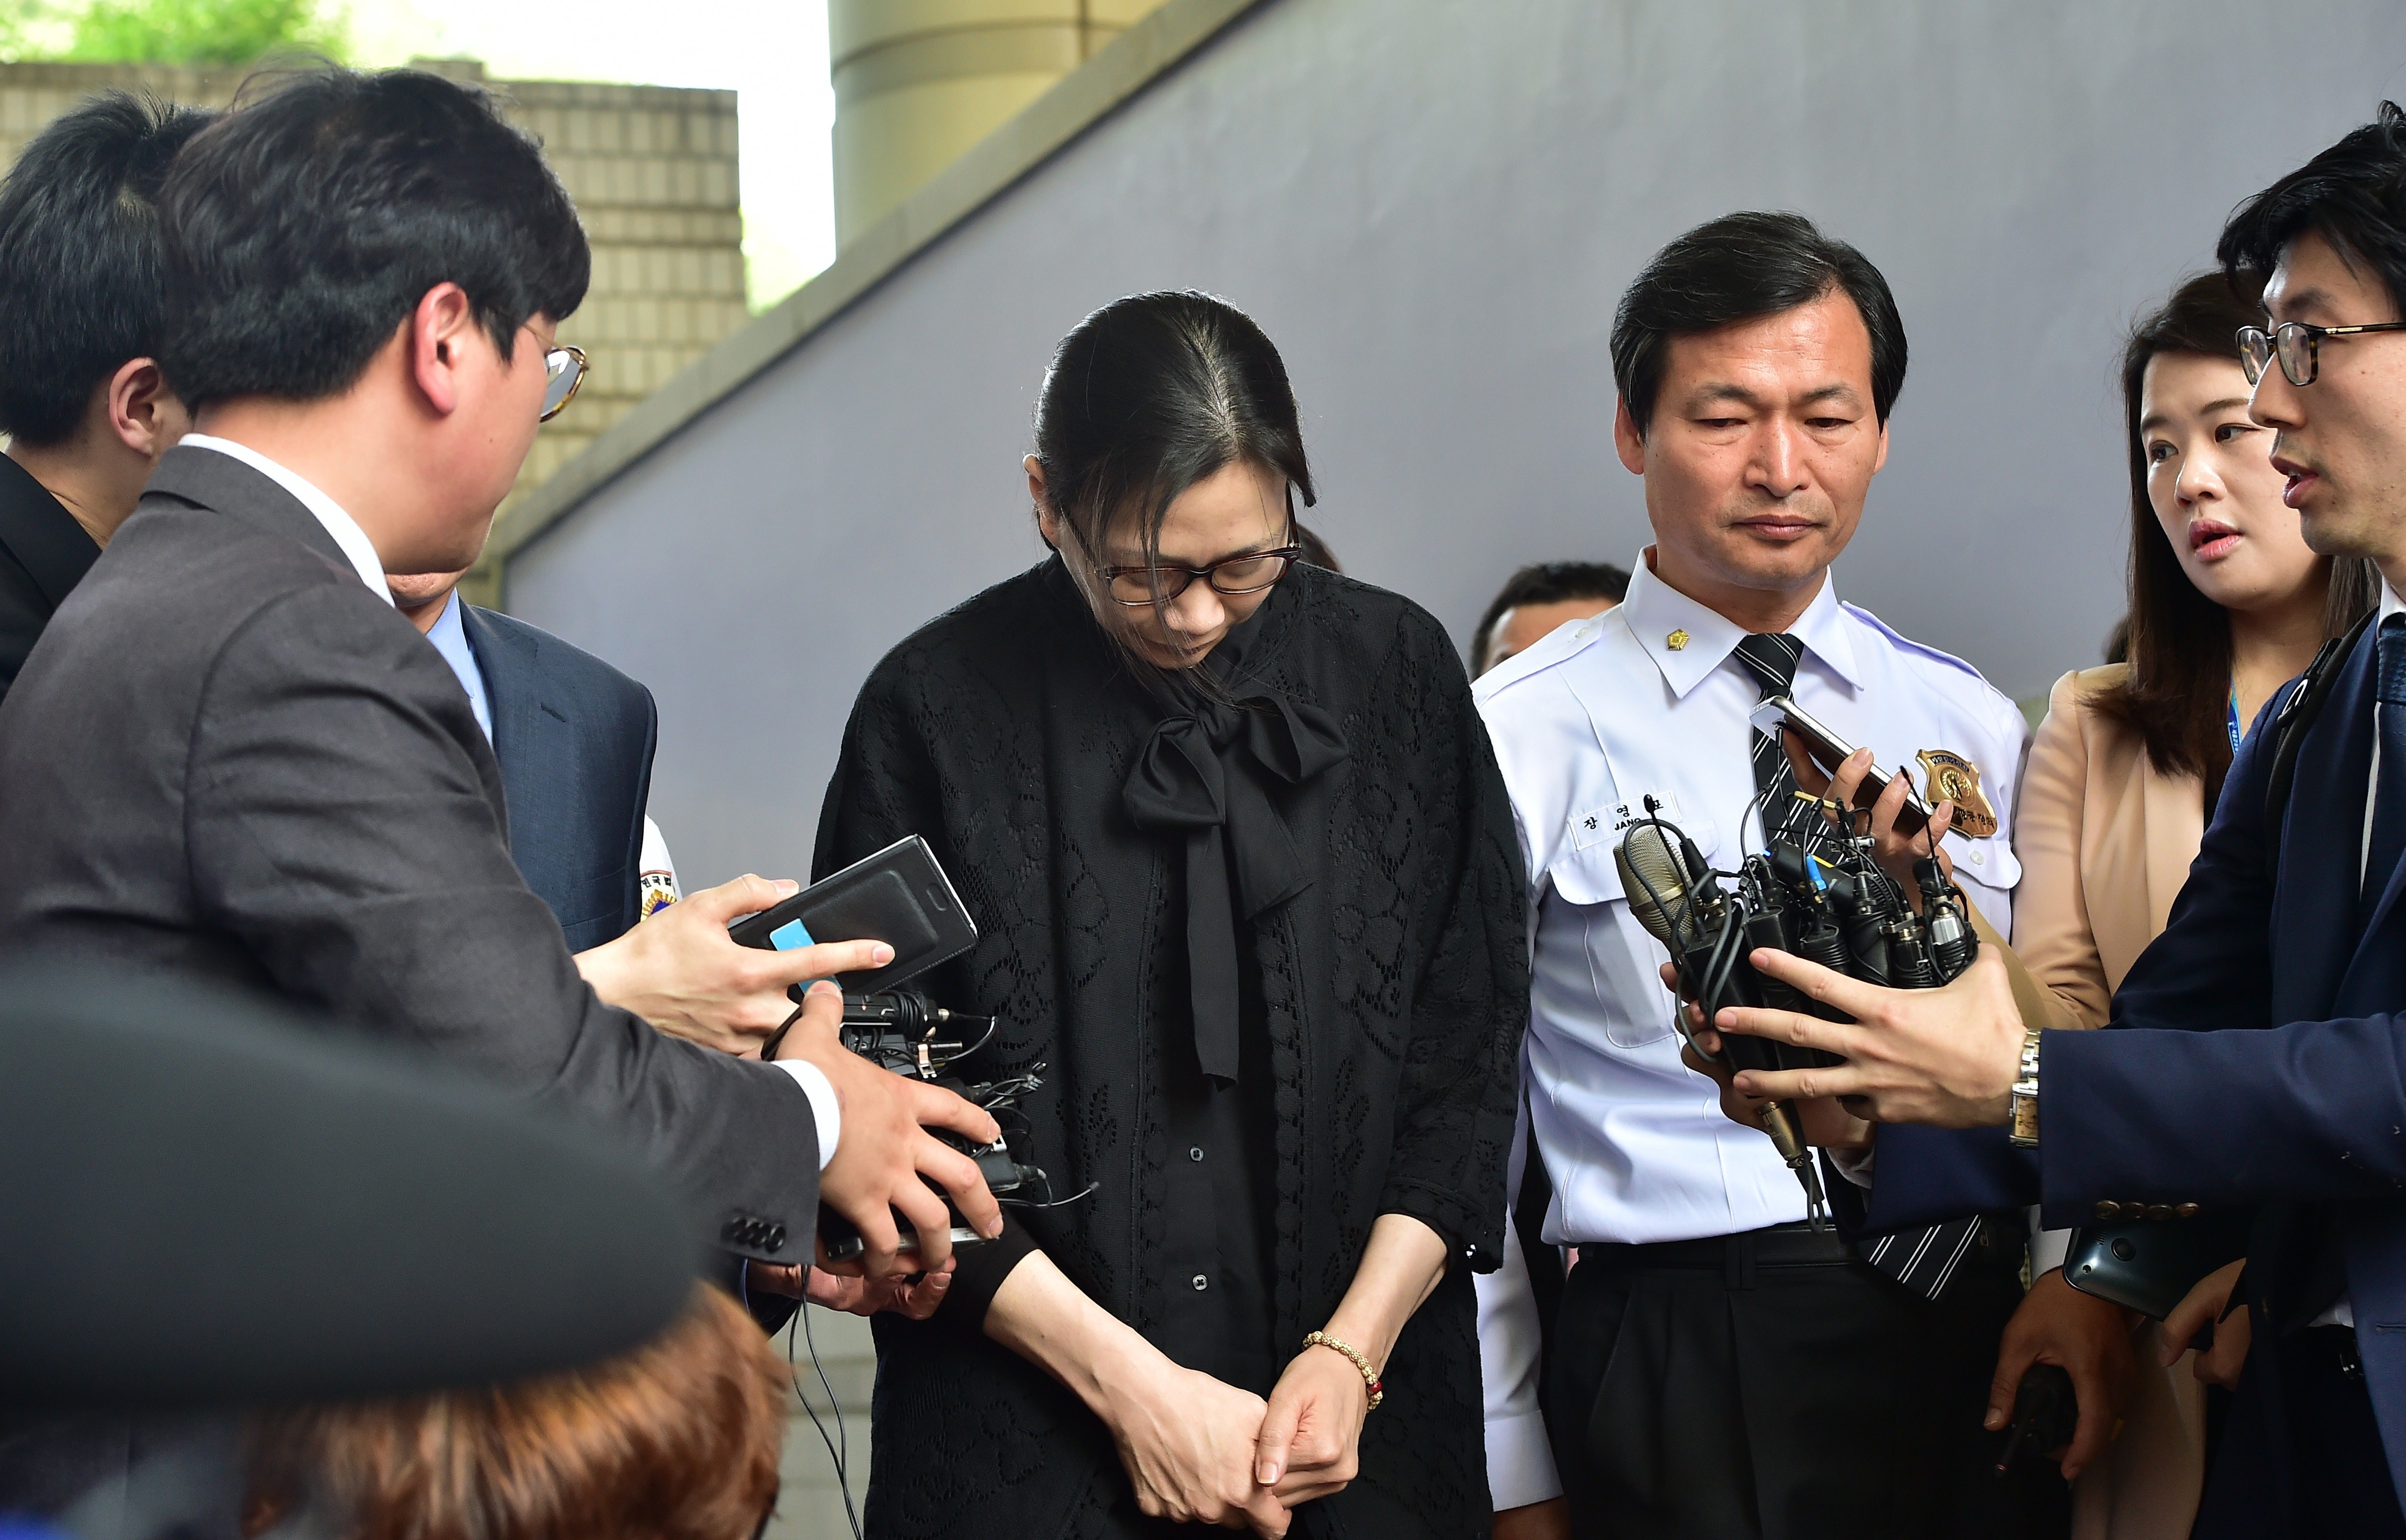 Former Korean Air executive Cho Hyun-Ah (Heather Cho) is surrounded by journalists after she received a suspended jail sentence and was freed by a Seoul appeals court on May 22, 2015. (Jung Yeon-Je—AFP/Getty Images)